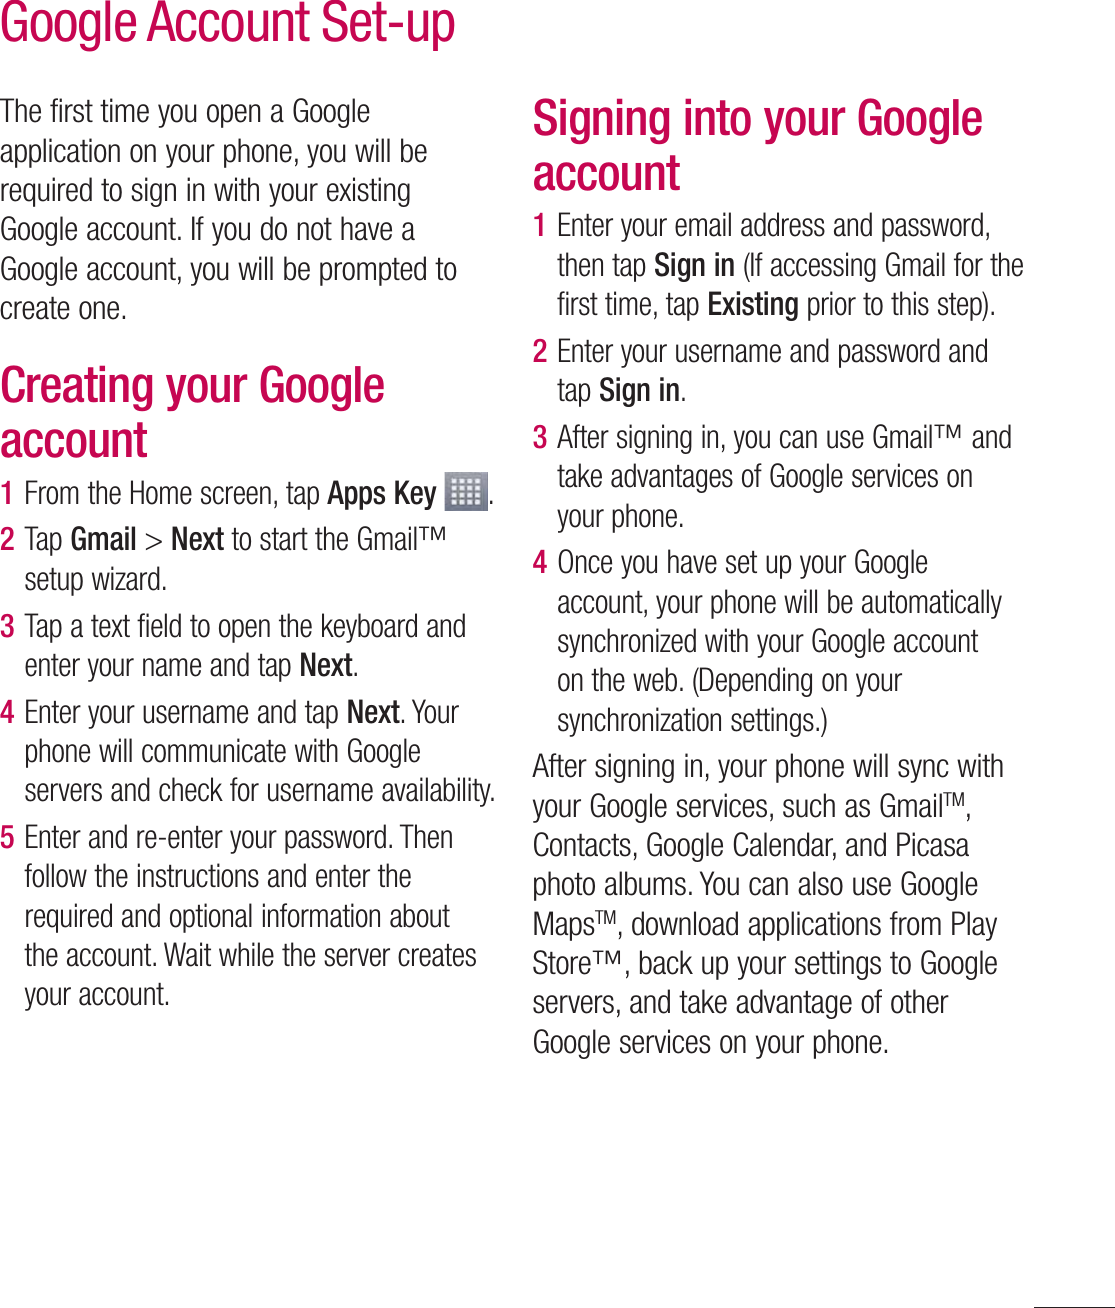 49The first time you open a Google application on your phone, you will be required to sign in with your existing Google account. If you do not have a Google account, you will be prompted to create one. Creating your Google account1  From the Home screen, tap Apps Key  .2  Tap Gmail &gt; Next to start the Gmail™ setup wizard.3  Tap a text field to open the keyboard and enter your name and tap Next.4  Enter your username and tap Next. Your phone will communicate with Google servers and check for username availability.5  Enter and re-enter your password. Then follow the instructions and enter the required and optional information about the account. Wait while the server creates your account.Signing into your Google account1  Enter your email address and password, then tap Sign in (If accessing Gmail for the first time, tap Existing prior to this step).2  Enter your username and password and tap Sign in.3  After signing in, you can use Gmail™ and take advantages of Google services on your phone. 4  Once you have set up your Google account, your phone will be automatically synchronized with your Google account on the web. (Depending on your synchronization settings.)After signing in, your phone will sync with your Google services, such as GmailTM, Contacts, Google Calendar, and Picasa photo albums. You can also use Google MapsTM, download applications from Play Store™, back up your settings to Google servers, and take advantage of other Google services on your phone. Google Account Set-up